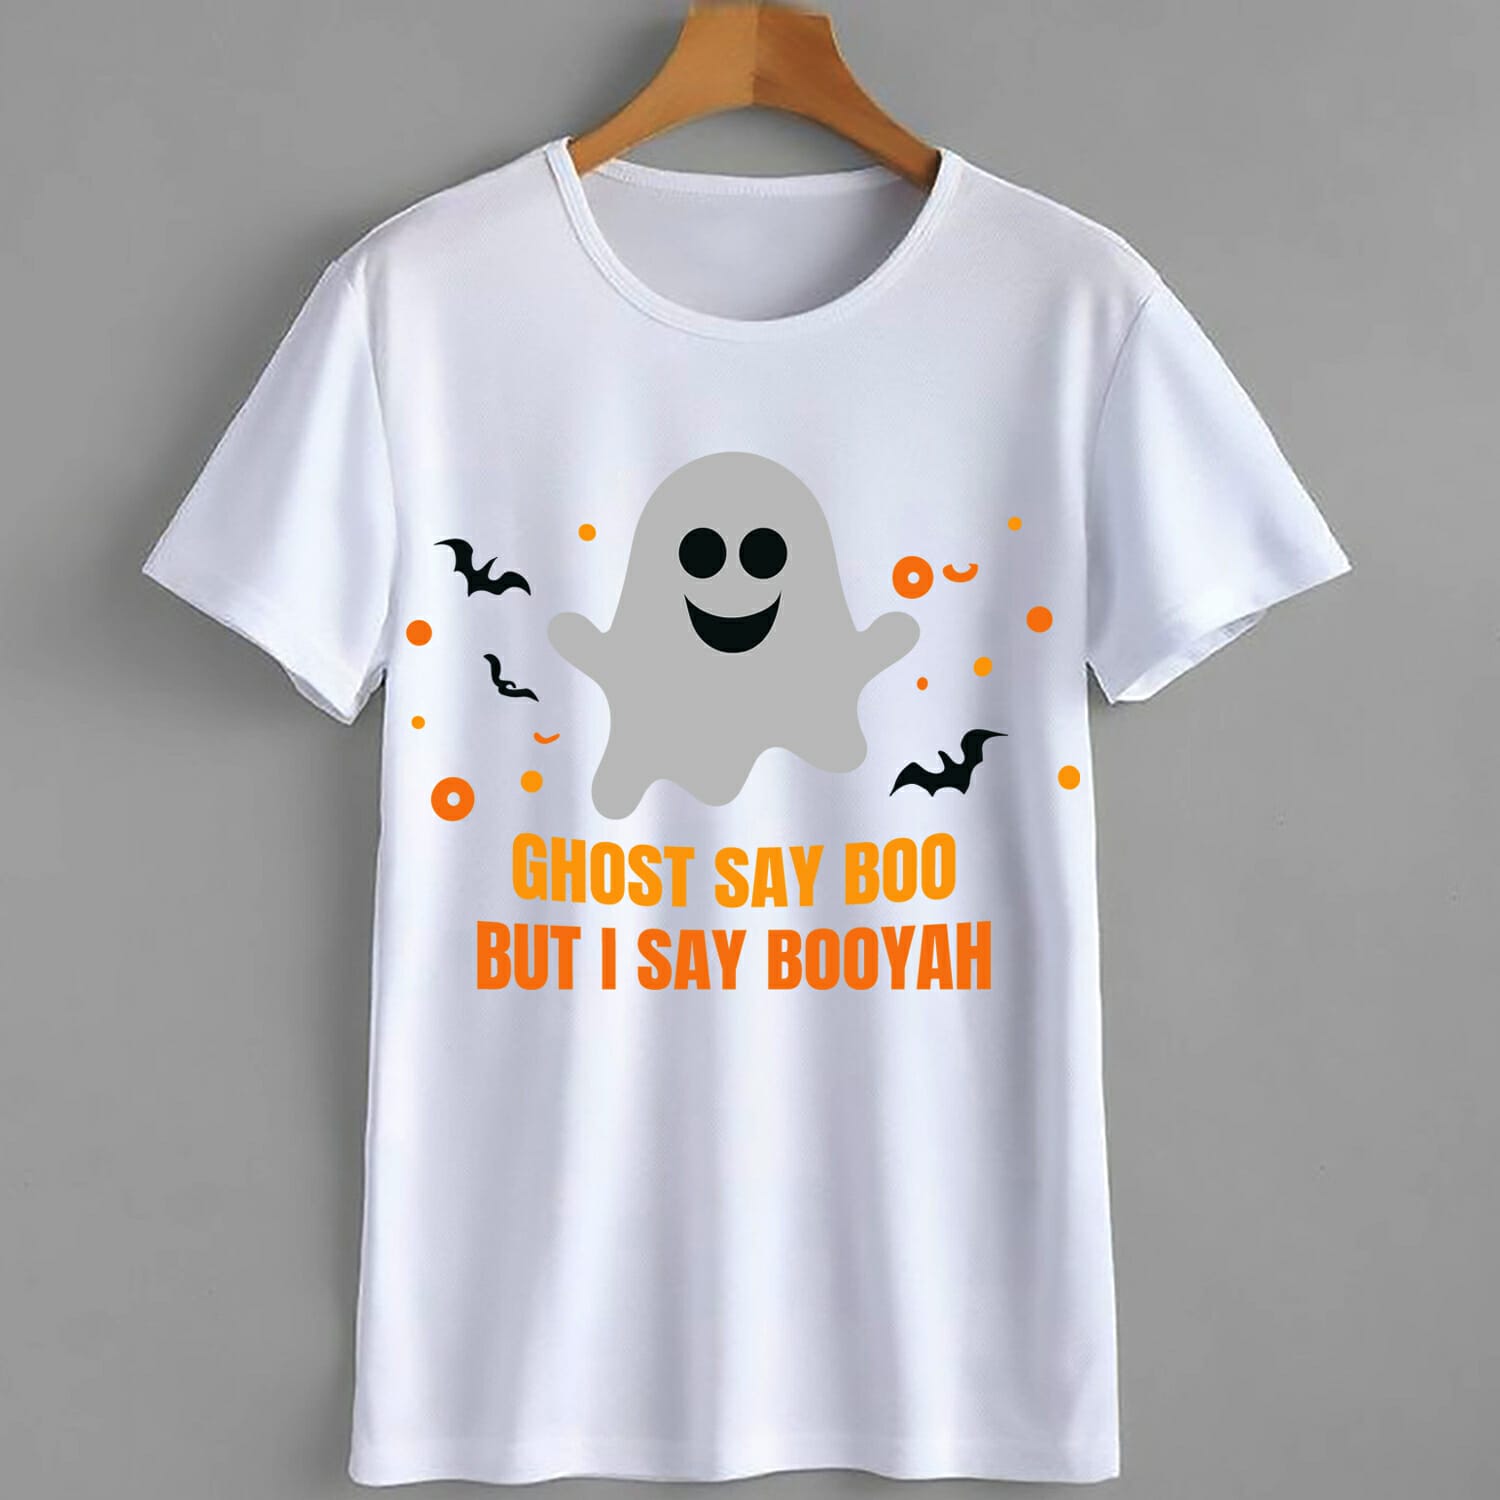 Ghost Say Boo But I Say Booyah T-Shirt Design